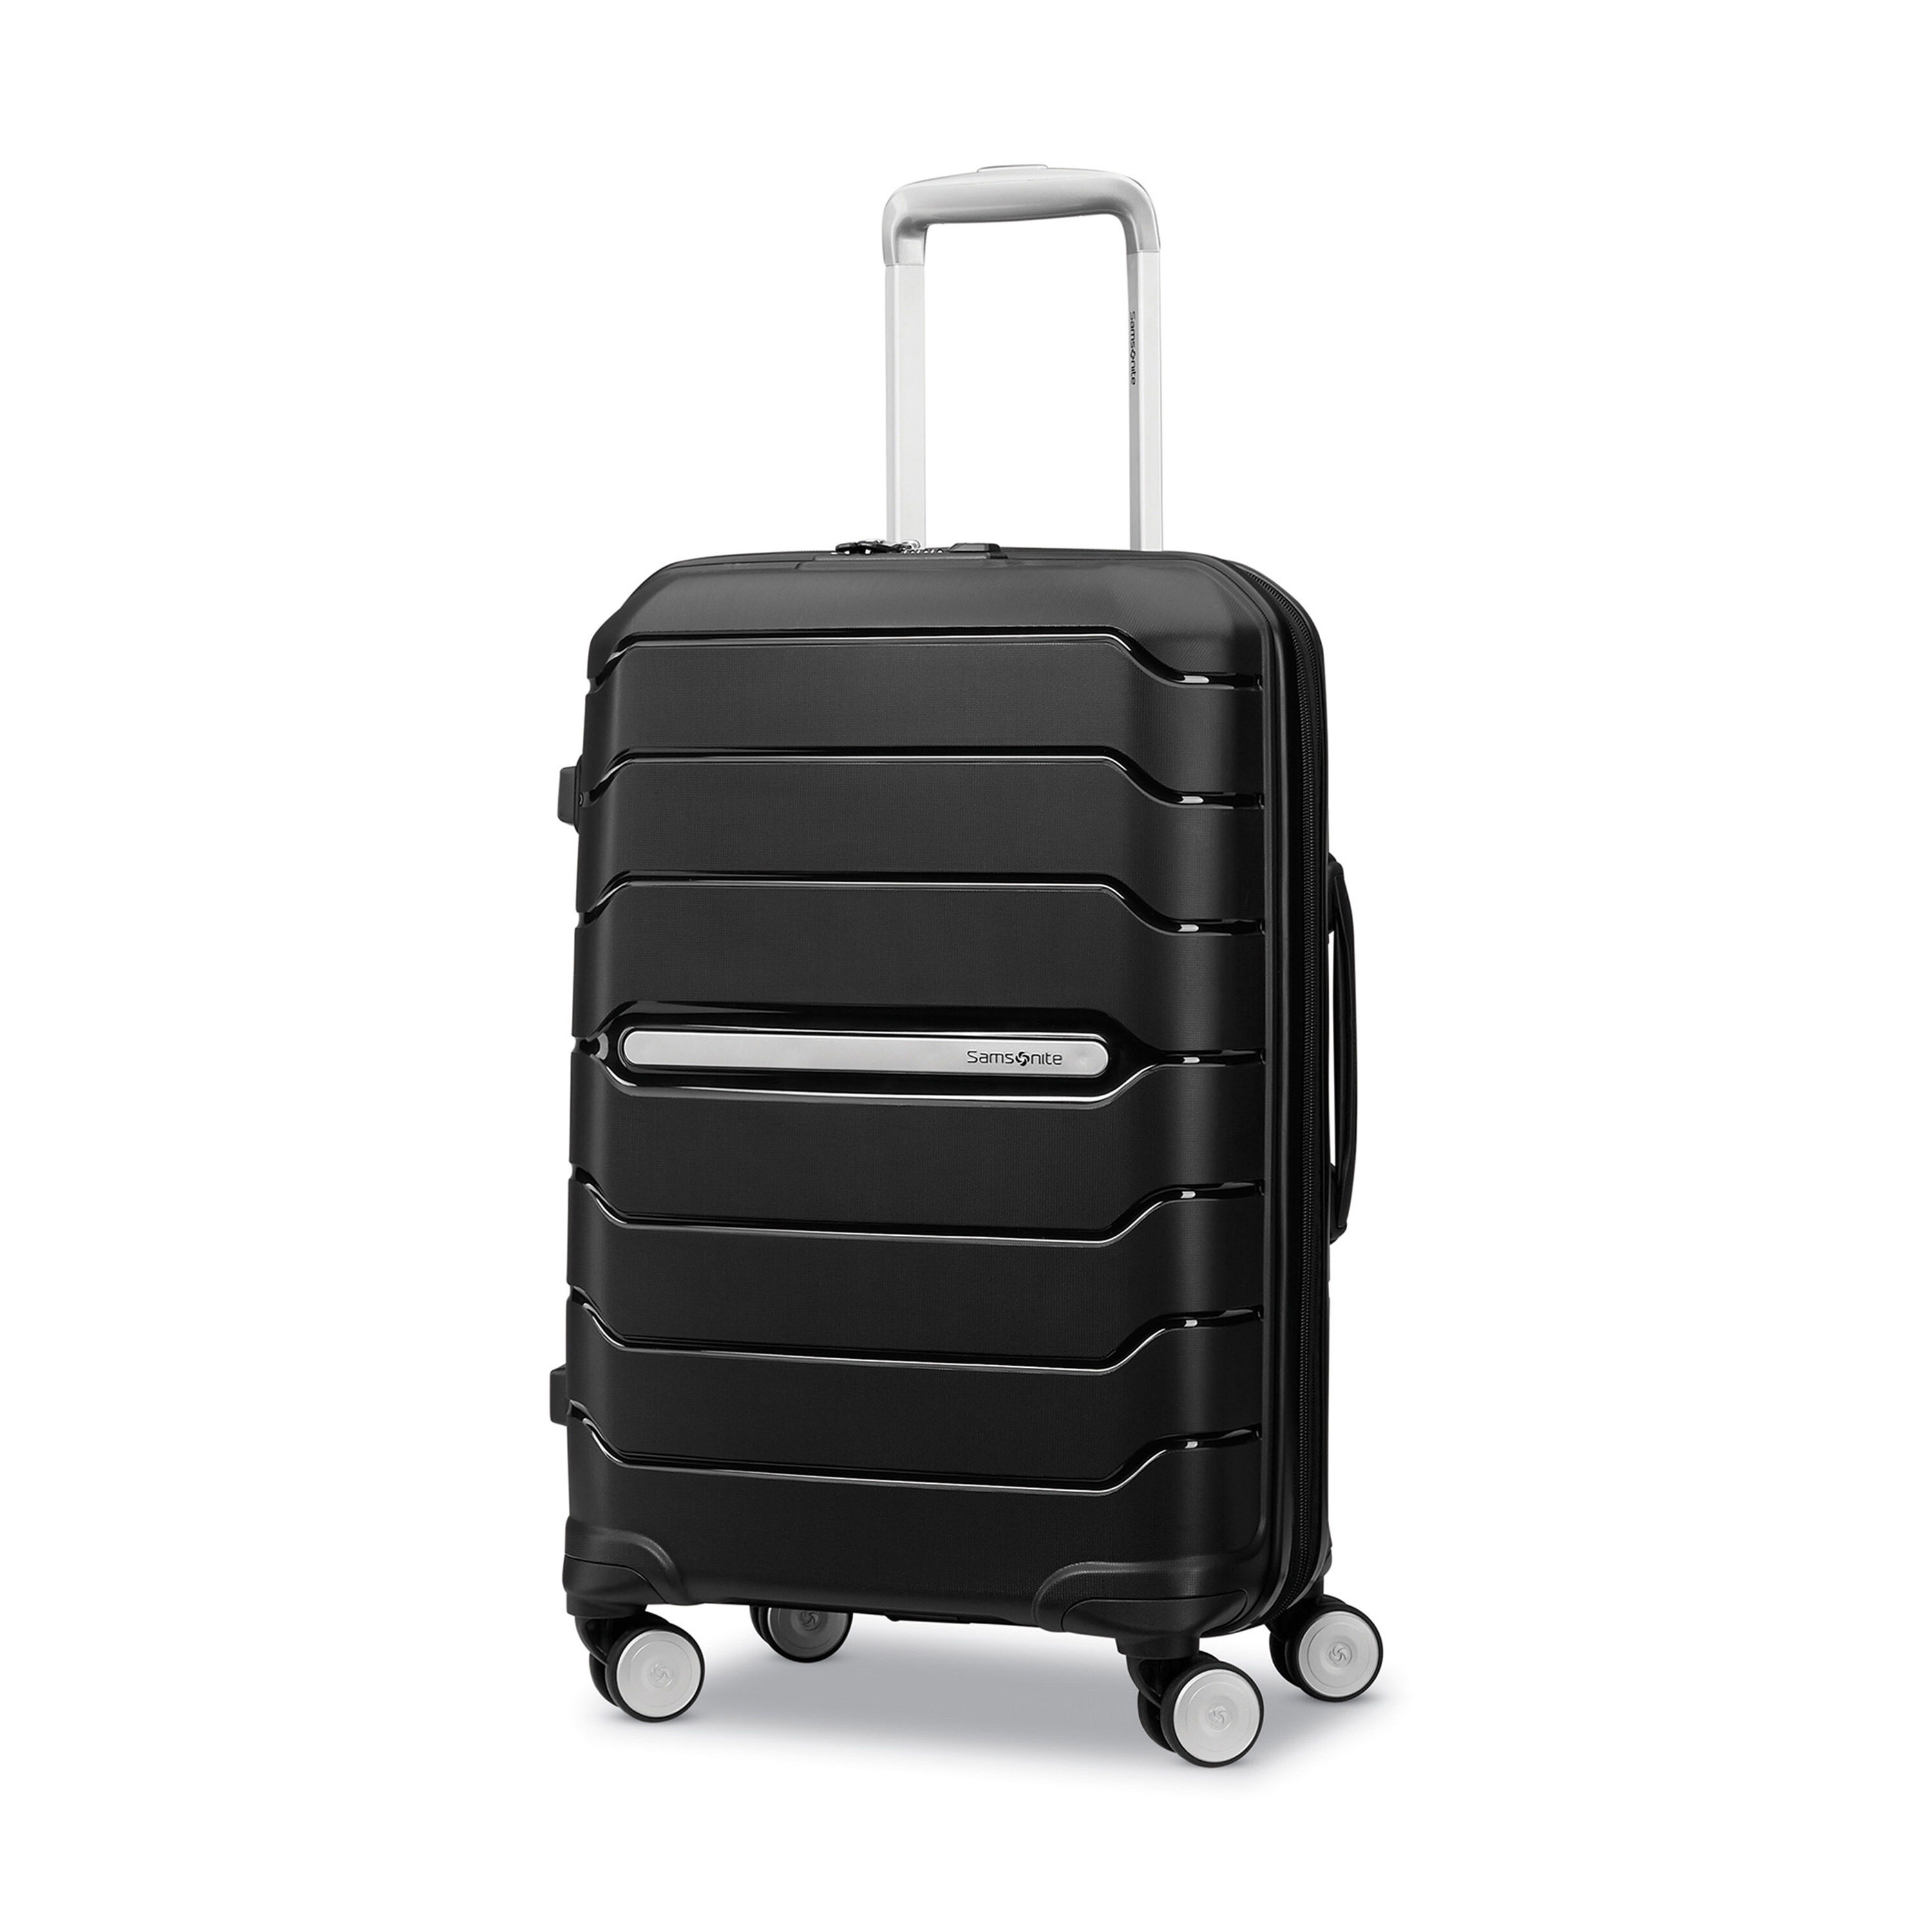 Freeform Carry-On Spinner, Hardside Carry-On Luggage